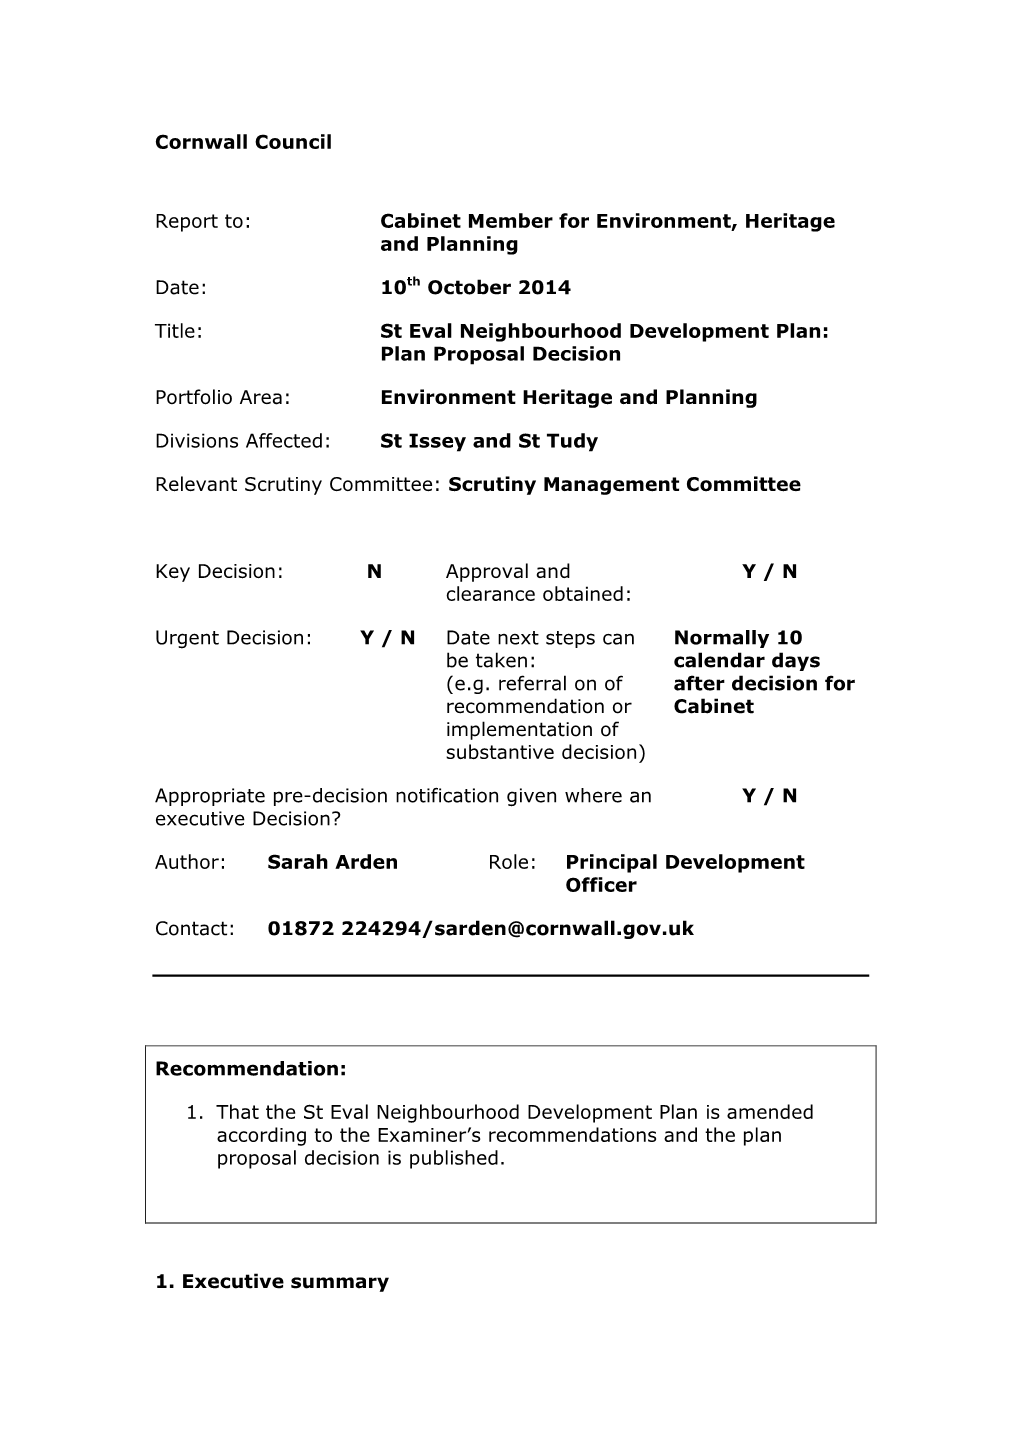 Cornwall Council Report To: Cabinet Member for Environment, Heritage and Planning Date: 10Th October 2014 Title: St Eval Neigh